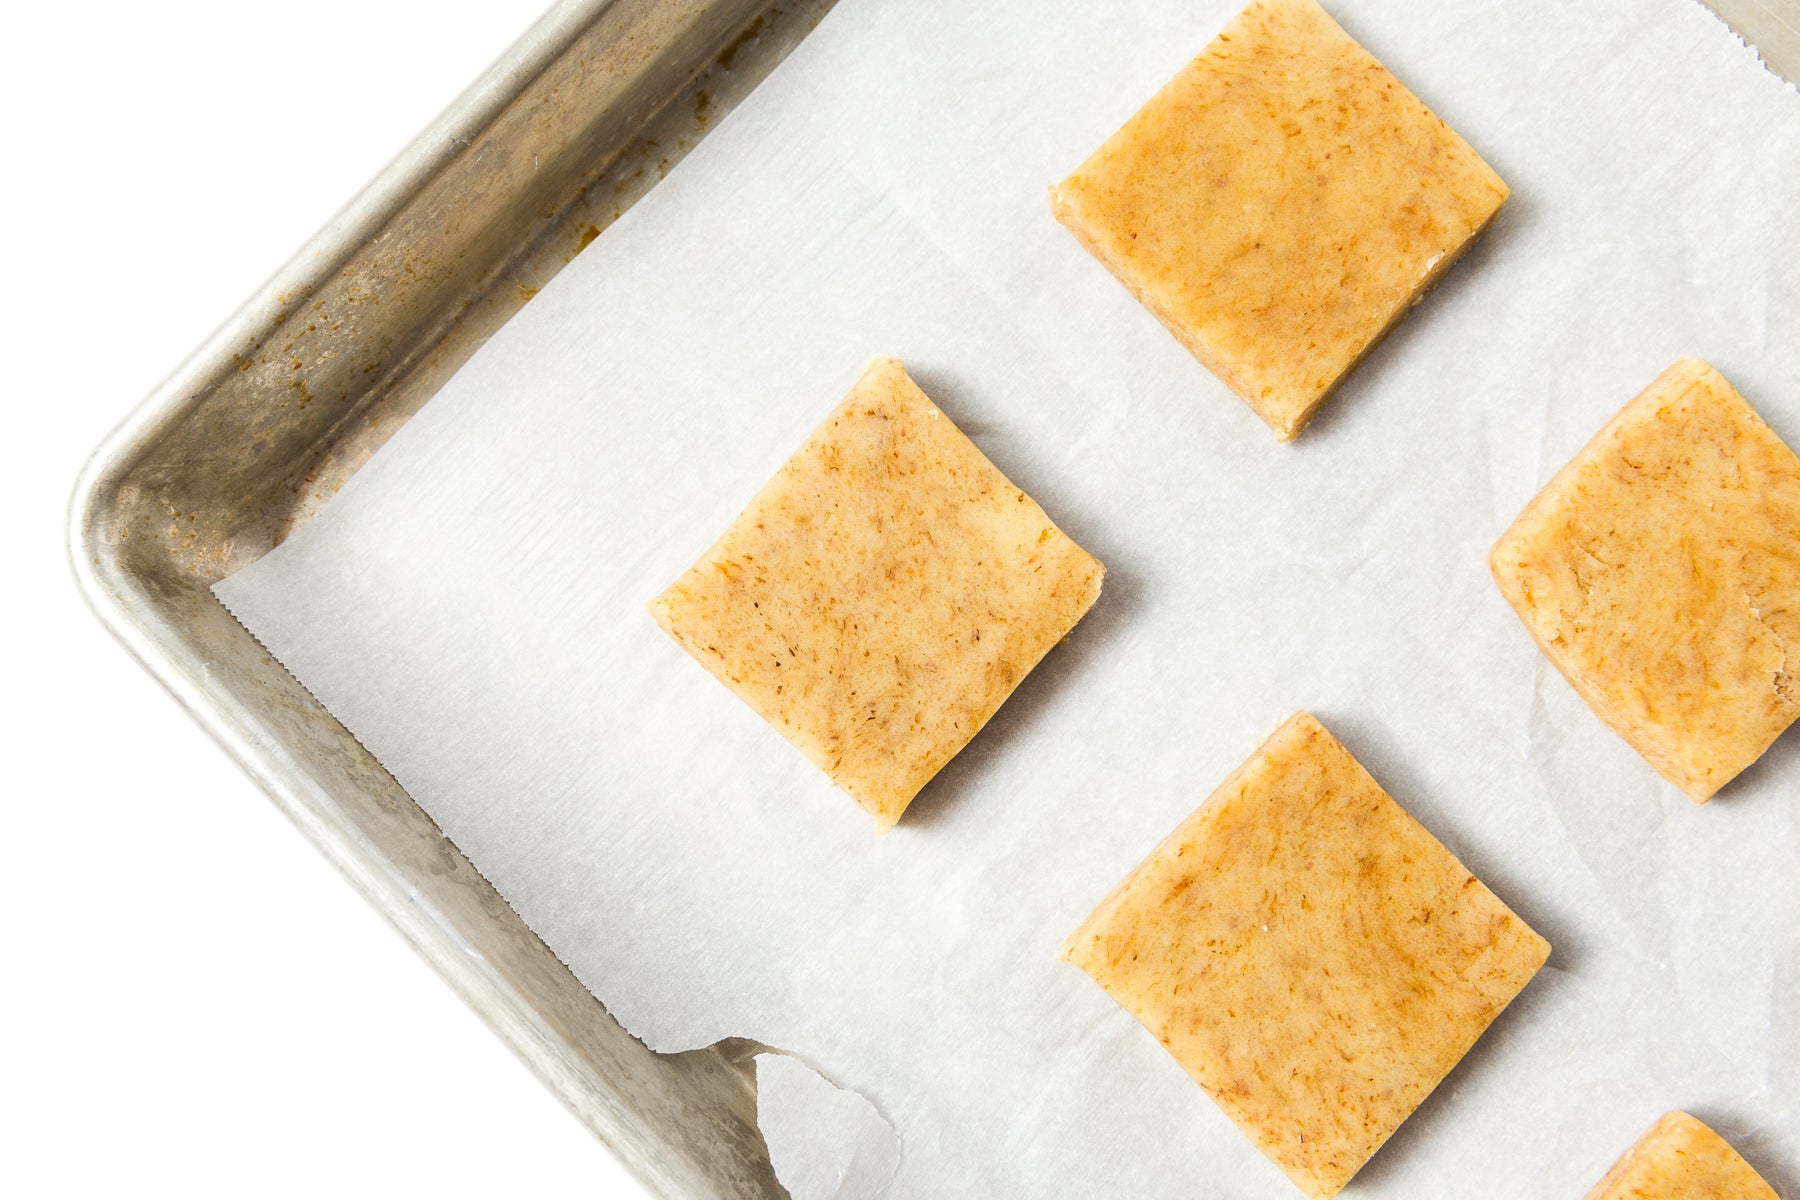 Image from above of four Miss Jones Baking Co Black + White Espresso Shortbread Bars on a baking sheet